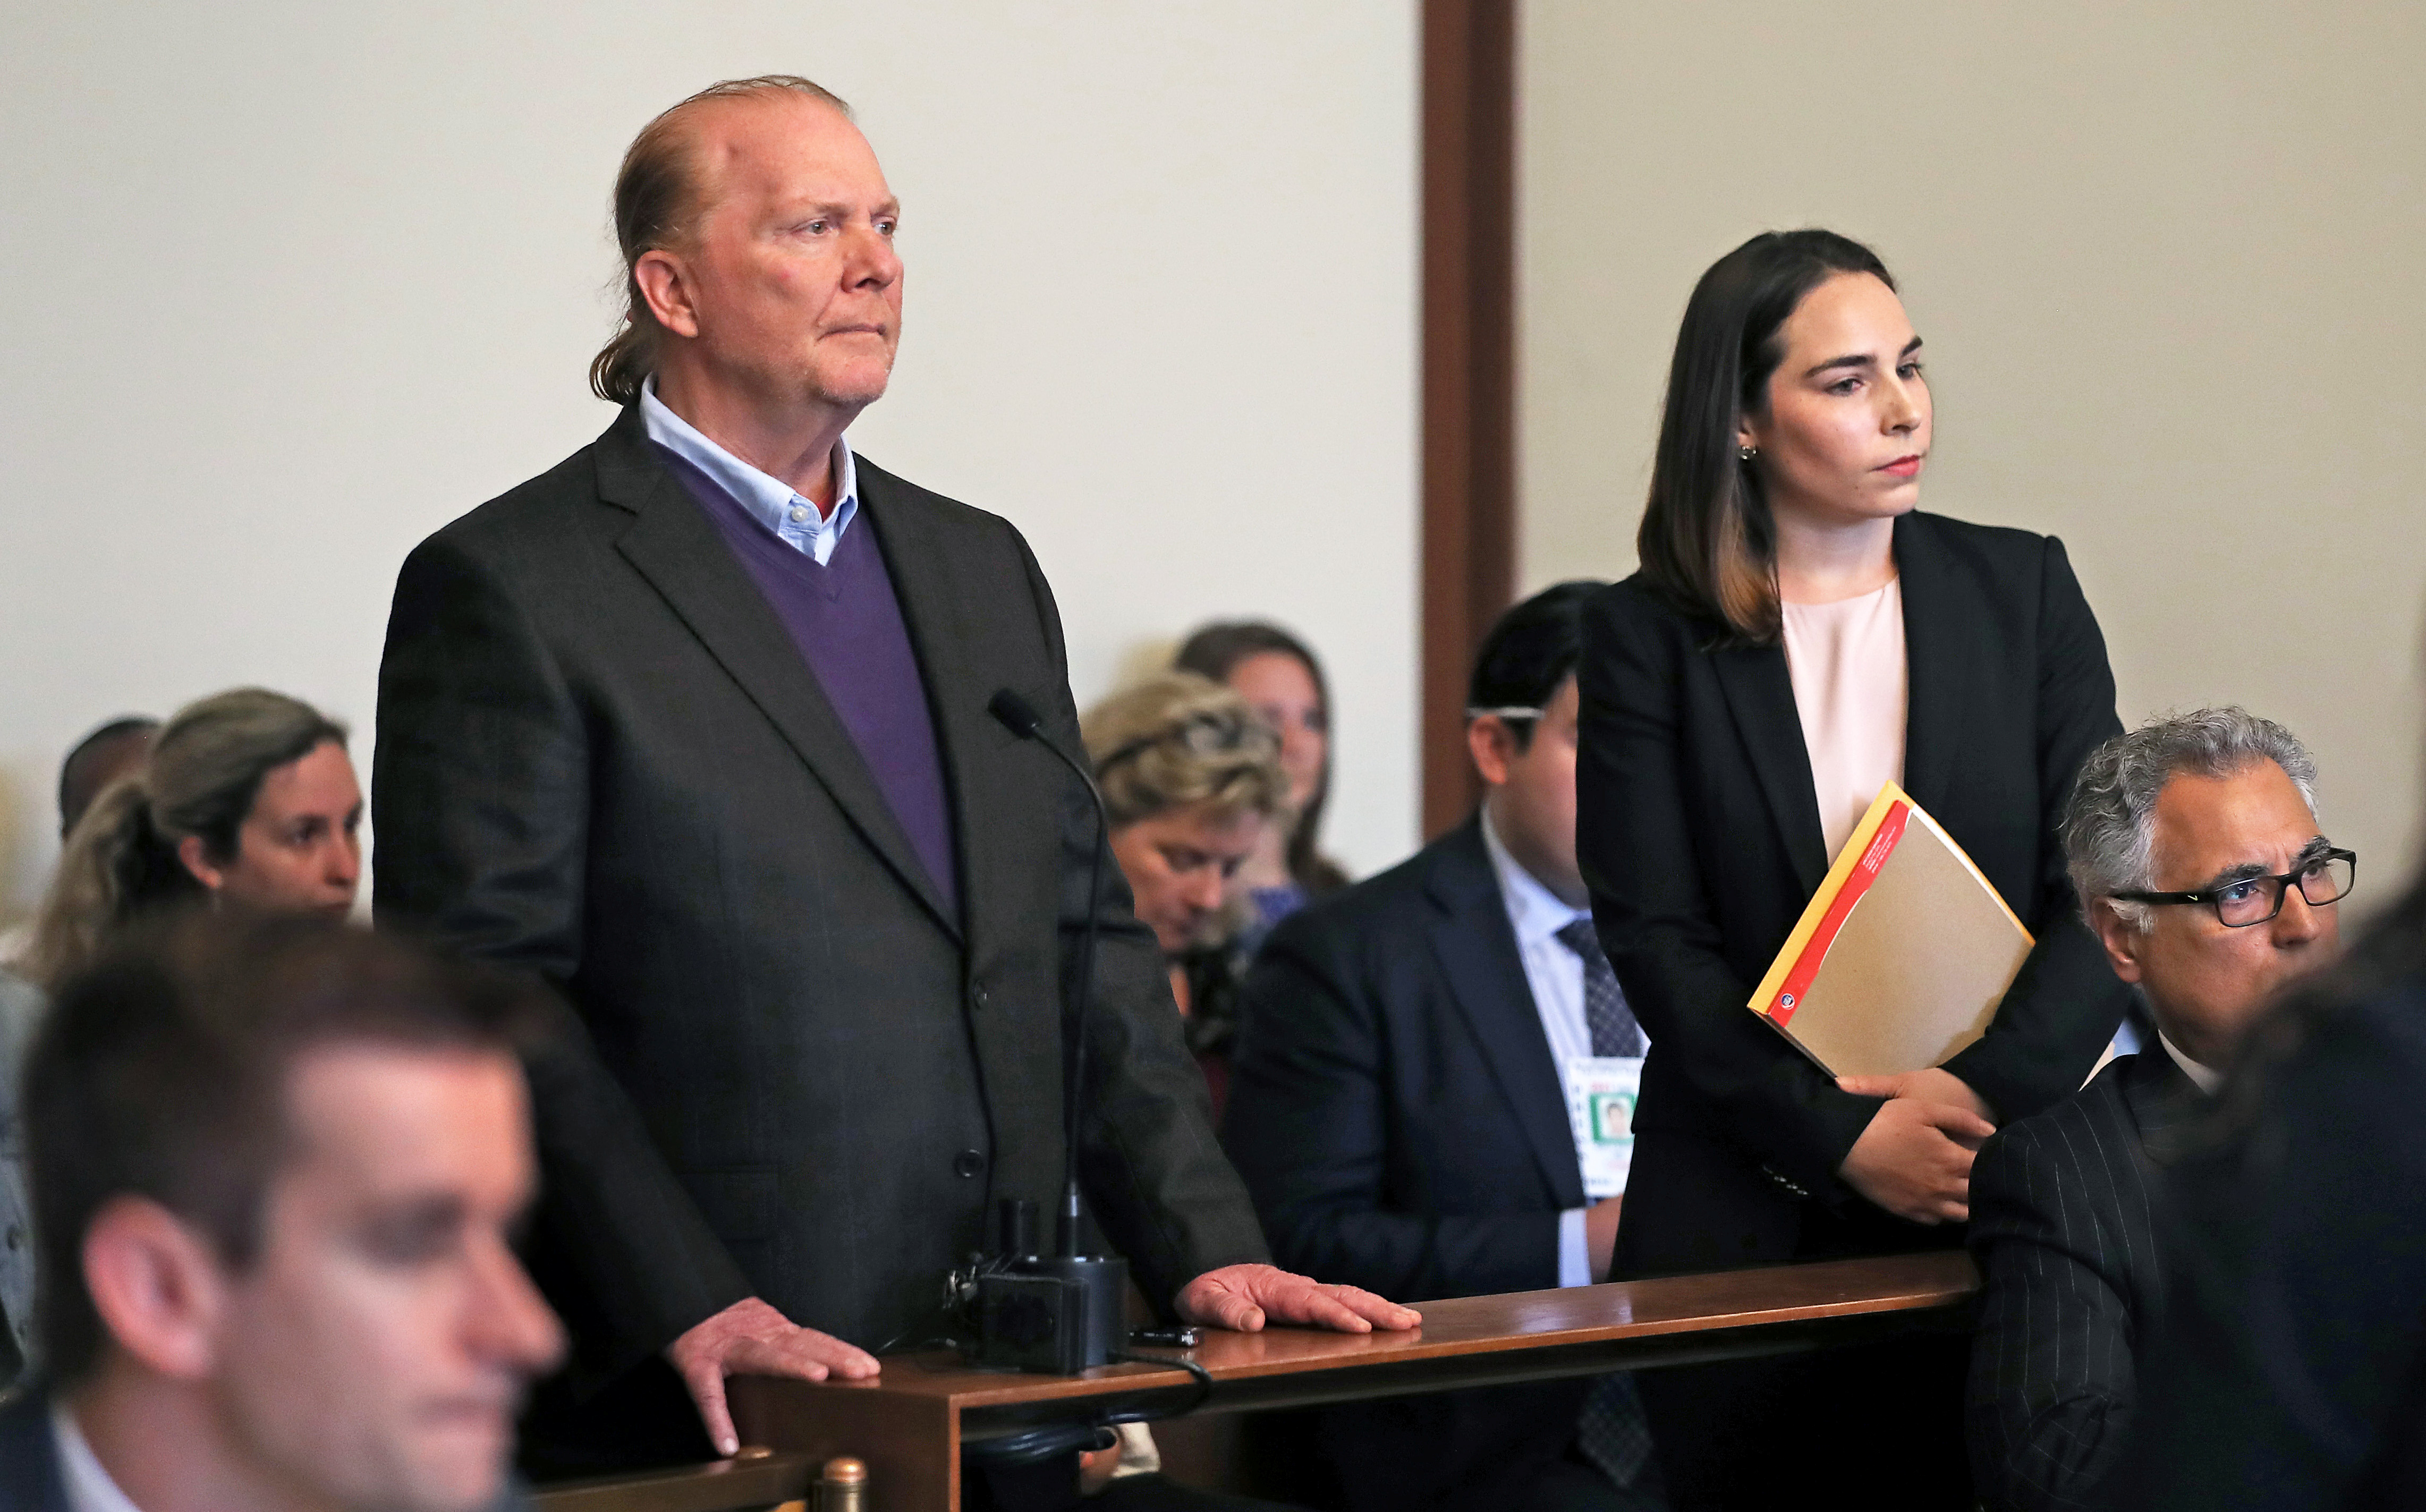 Celebrity chef Mario Batali, 58, is arraigned on a charge of indecent assault and battery at Boston Municpal Court in Boston